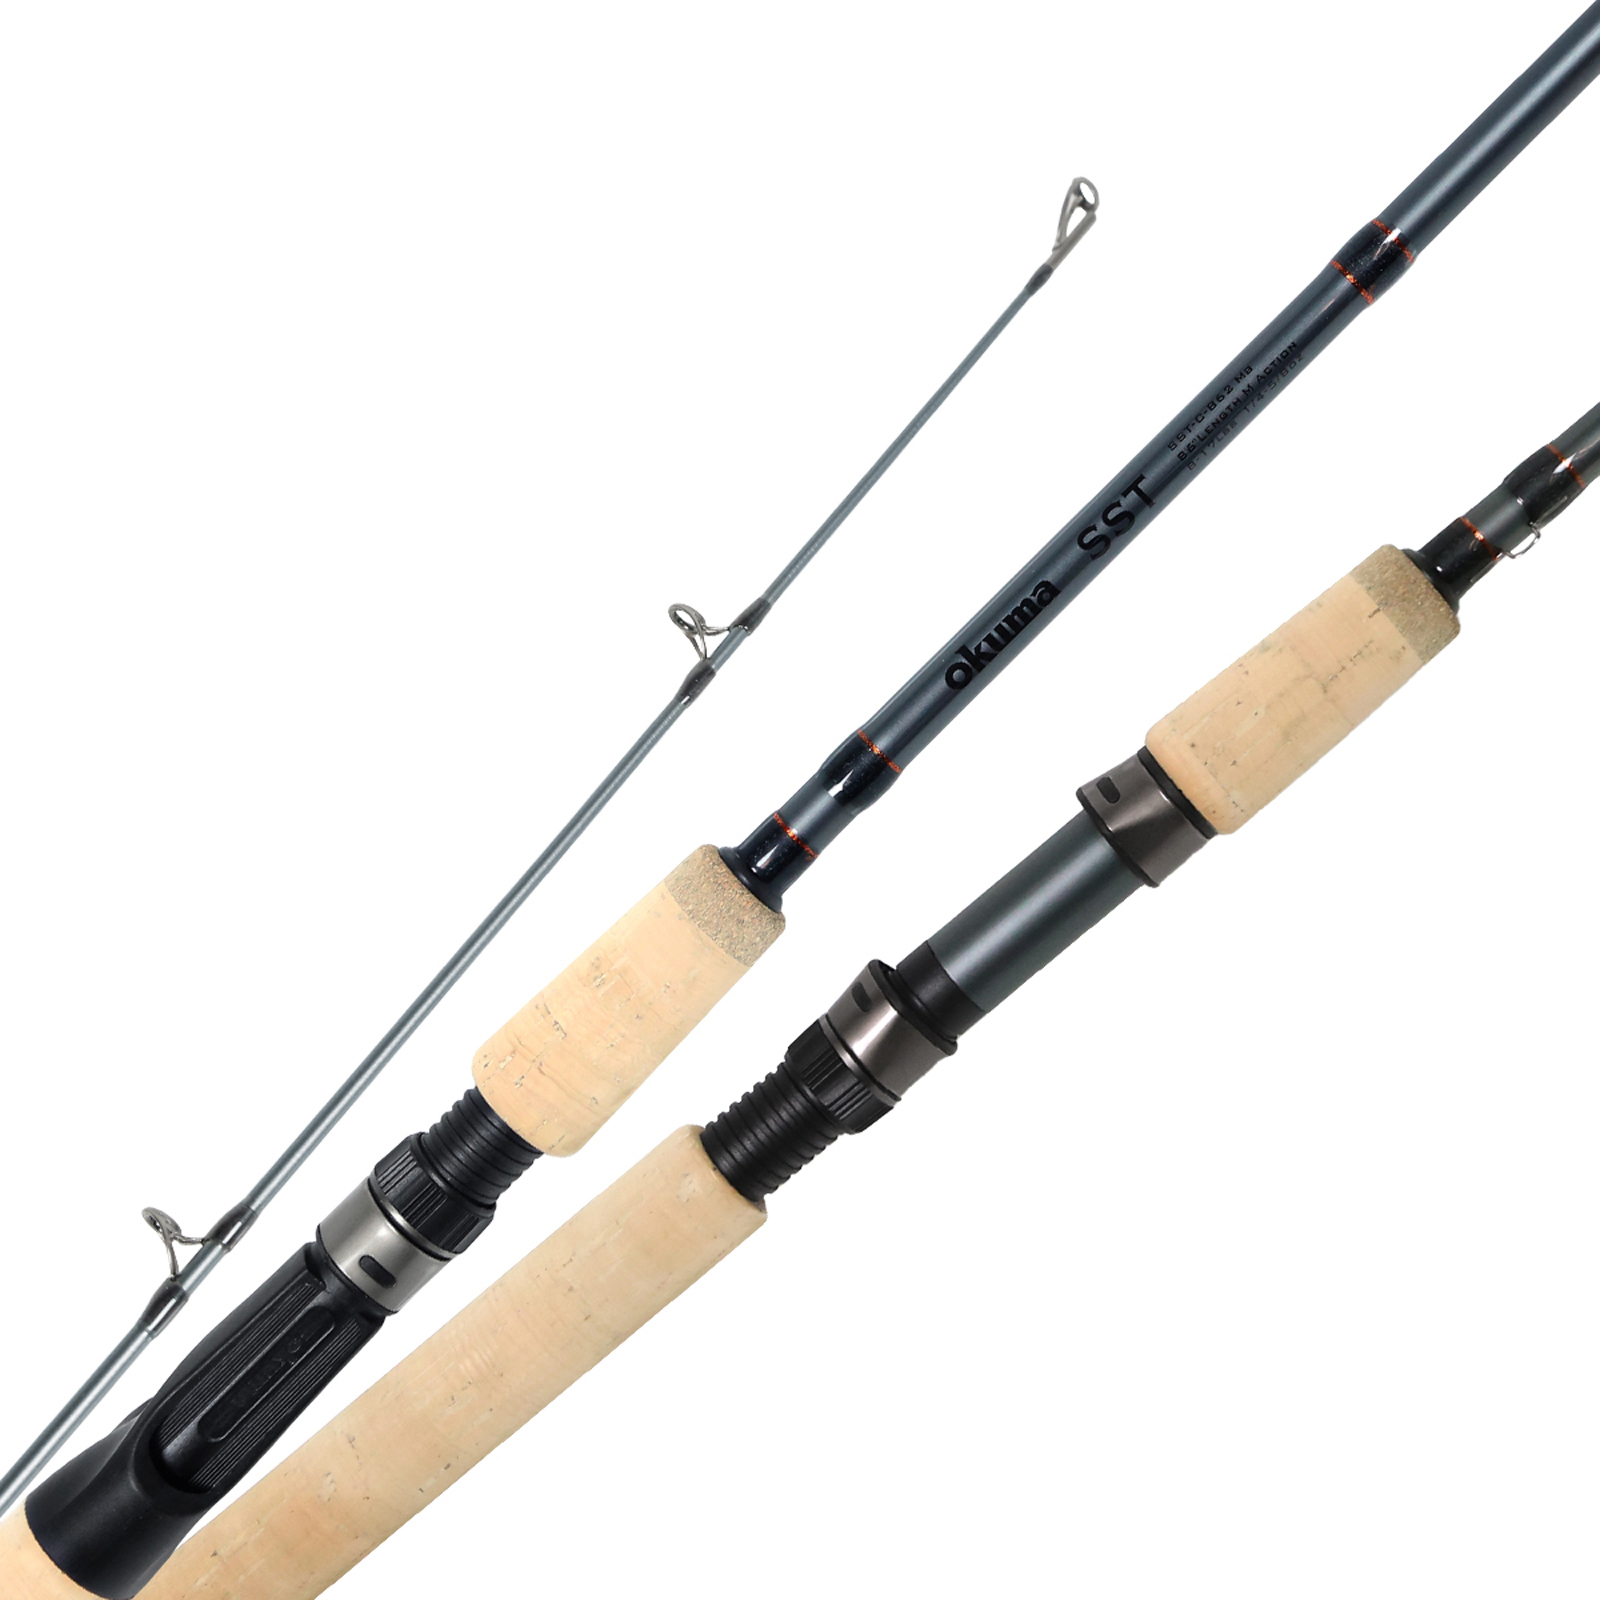 Okuma SST A Series Medium-Heavy Spinning Rod with Cork Grip, 10 - 20 lbs,  3/8 - 1-1/2oz, 2 Piece SST-S-862MHa , $4.00 Off with Free S&H — CampSaver